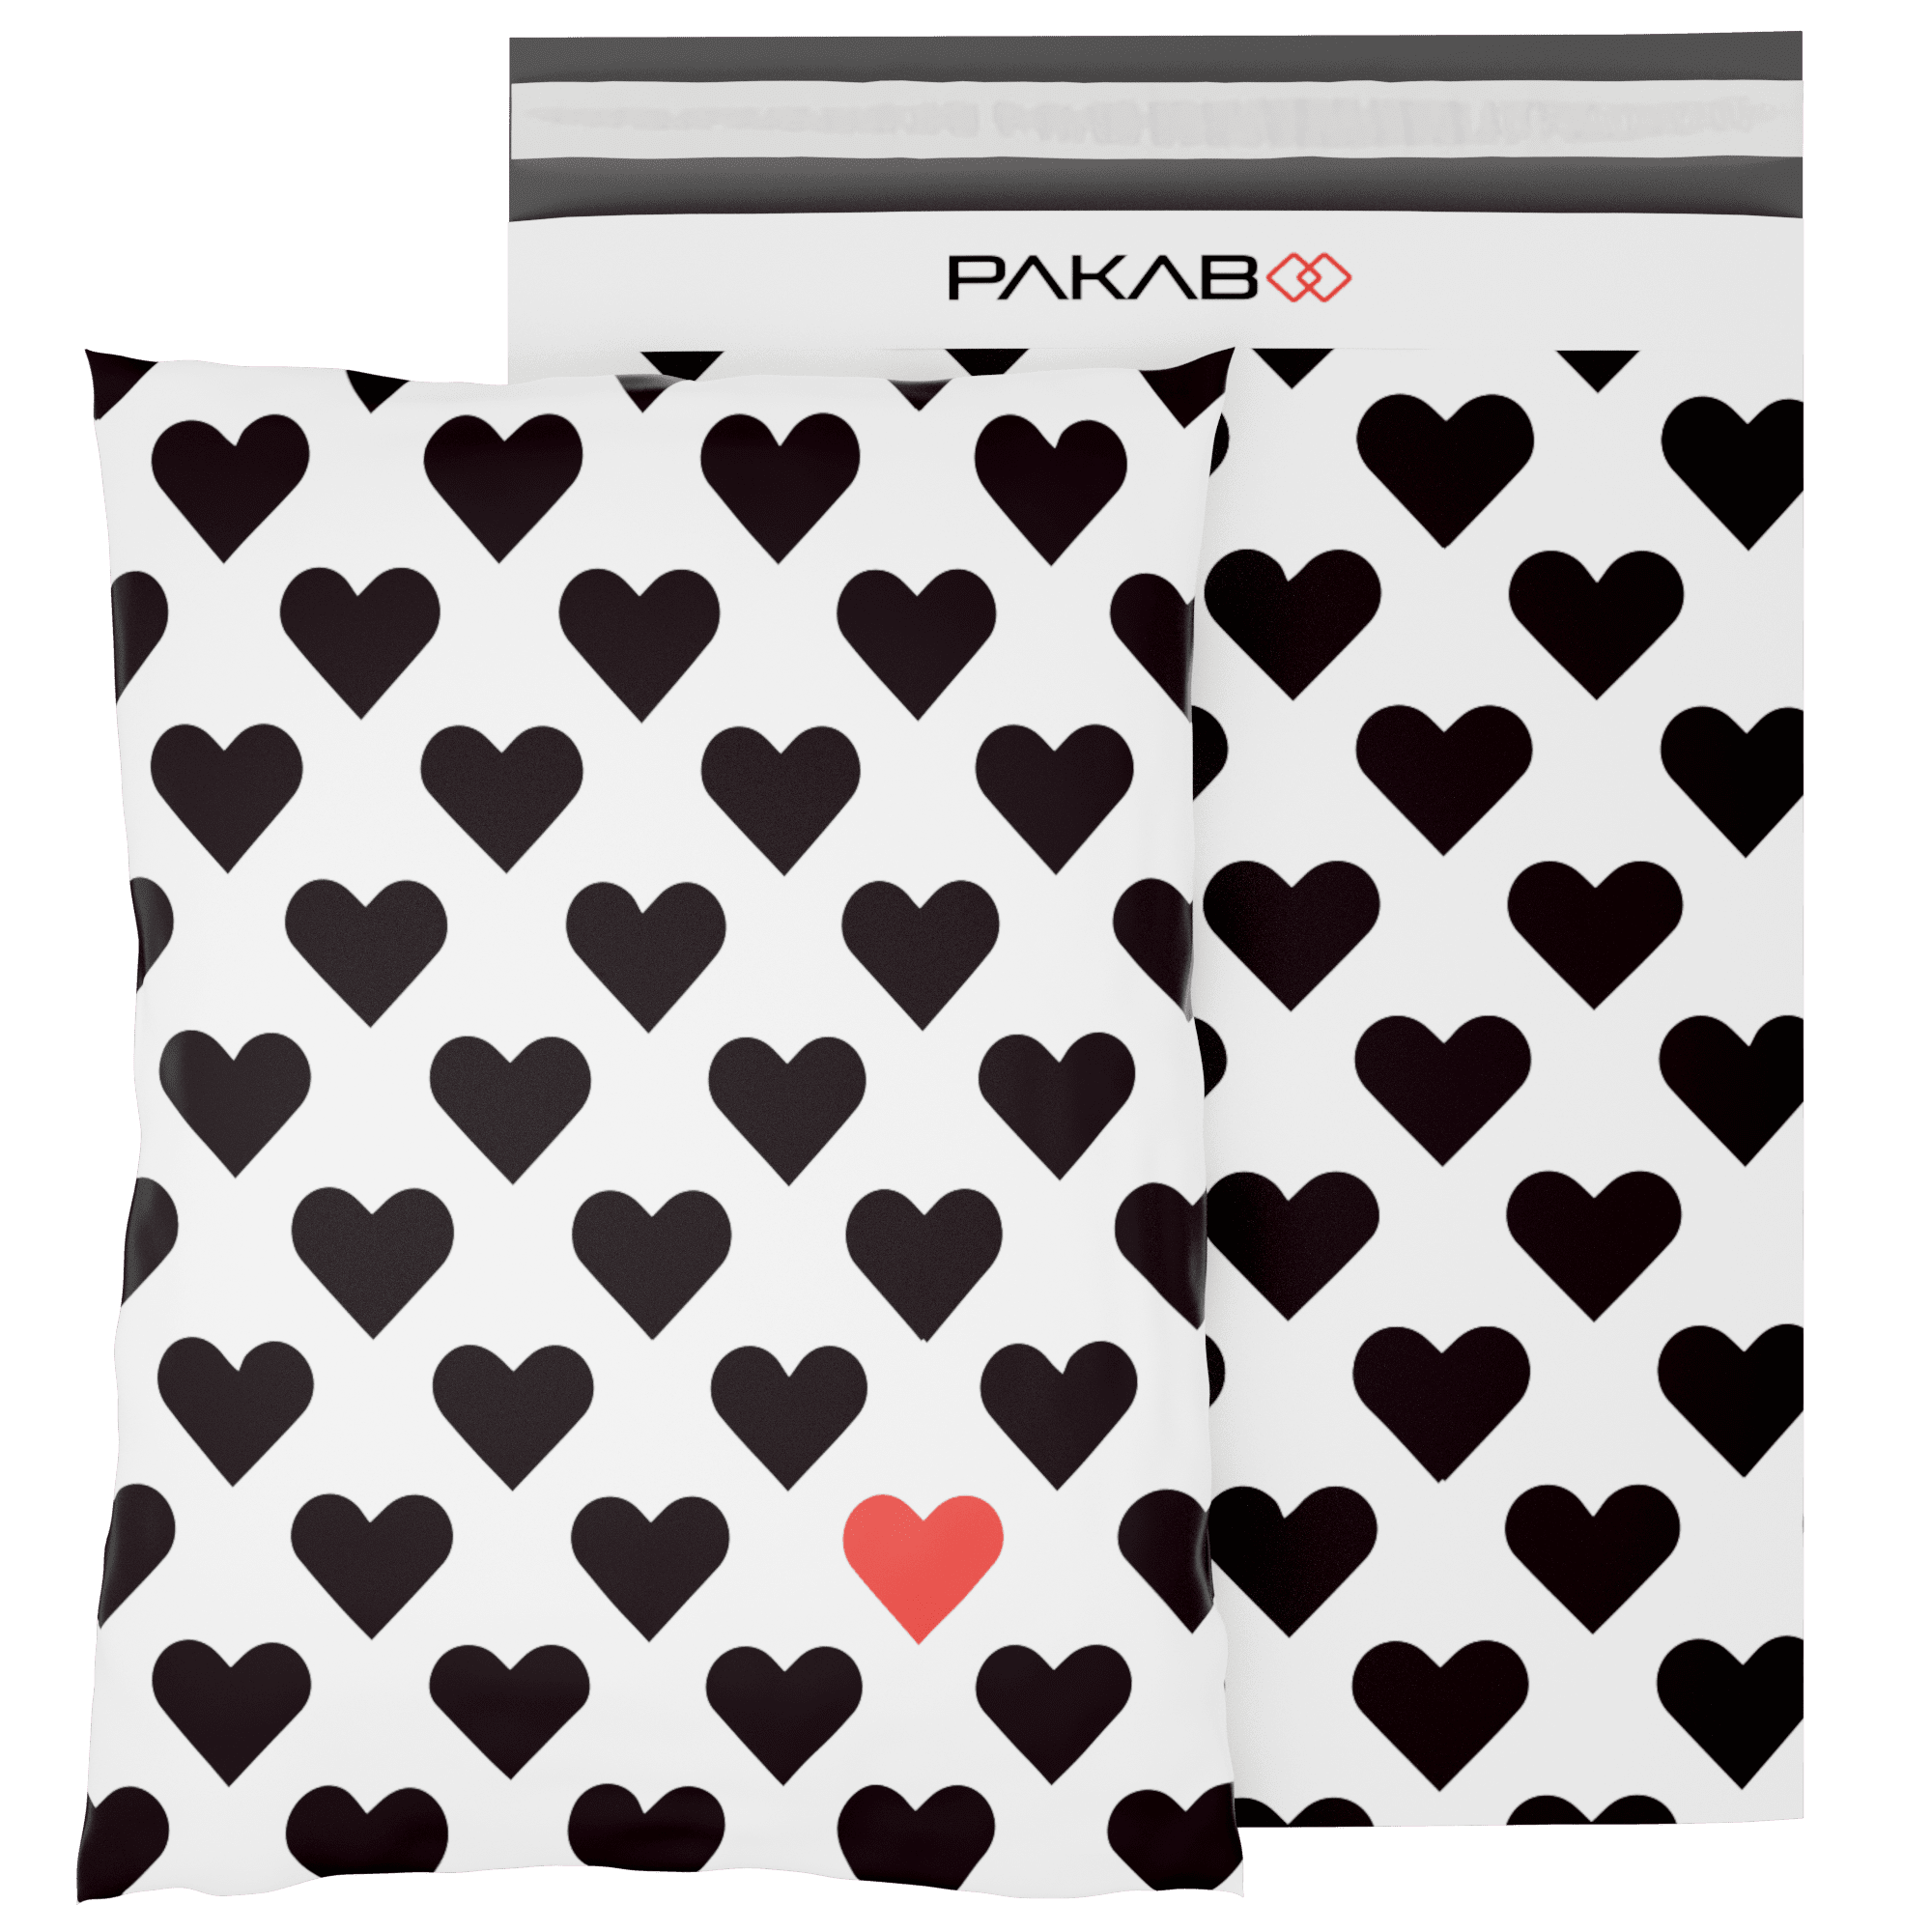 Non-Padded Envelopes with Tamper Proof Self-Seal Love Heart Print Packaging PAKABOO Poly Mailer Shipping Bags 10x13 Inch 100 Pack